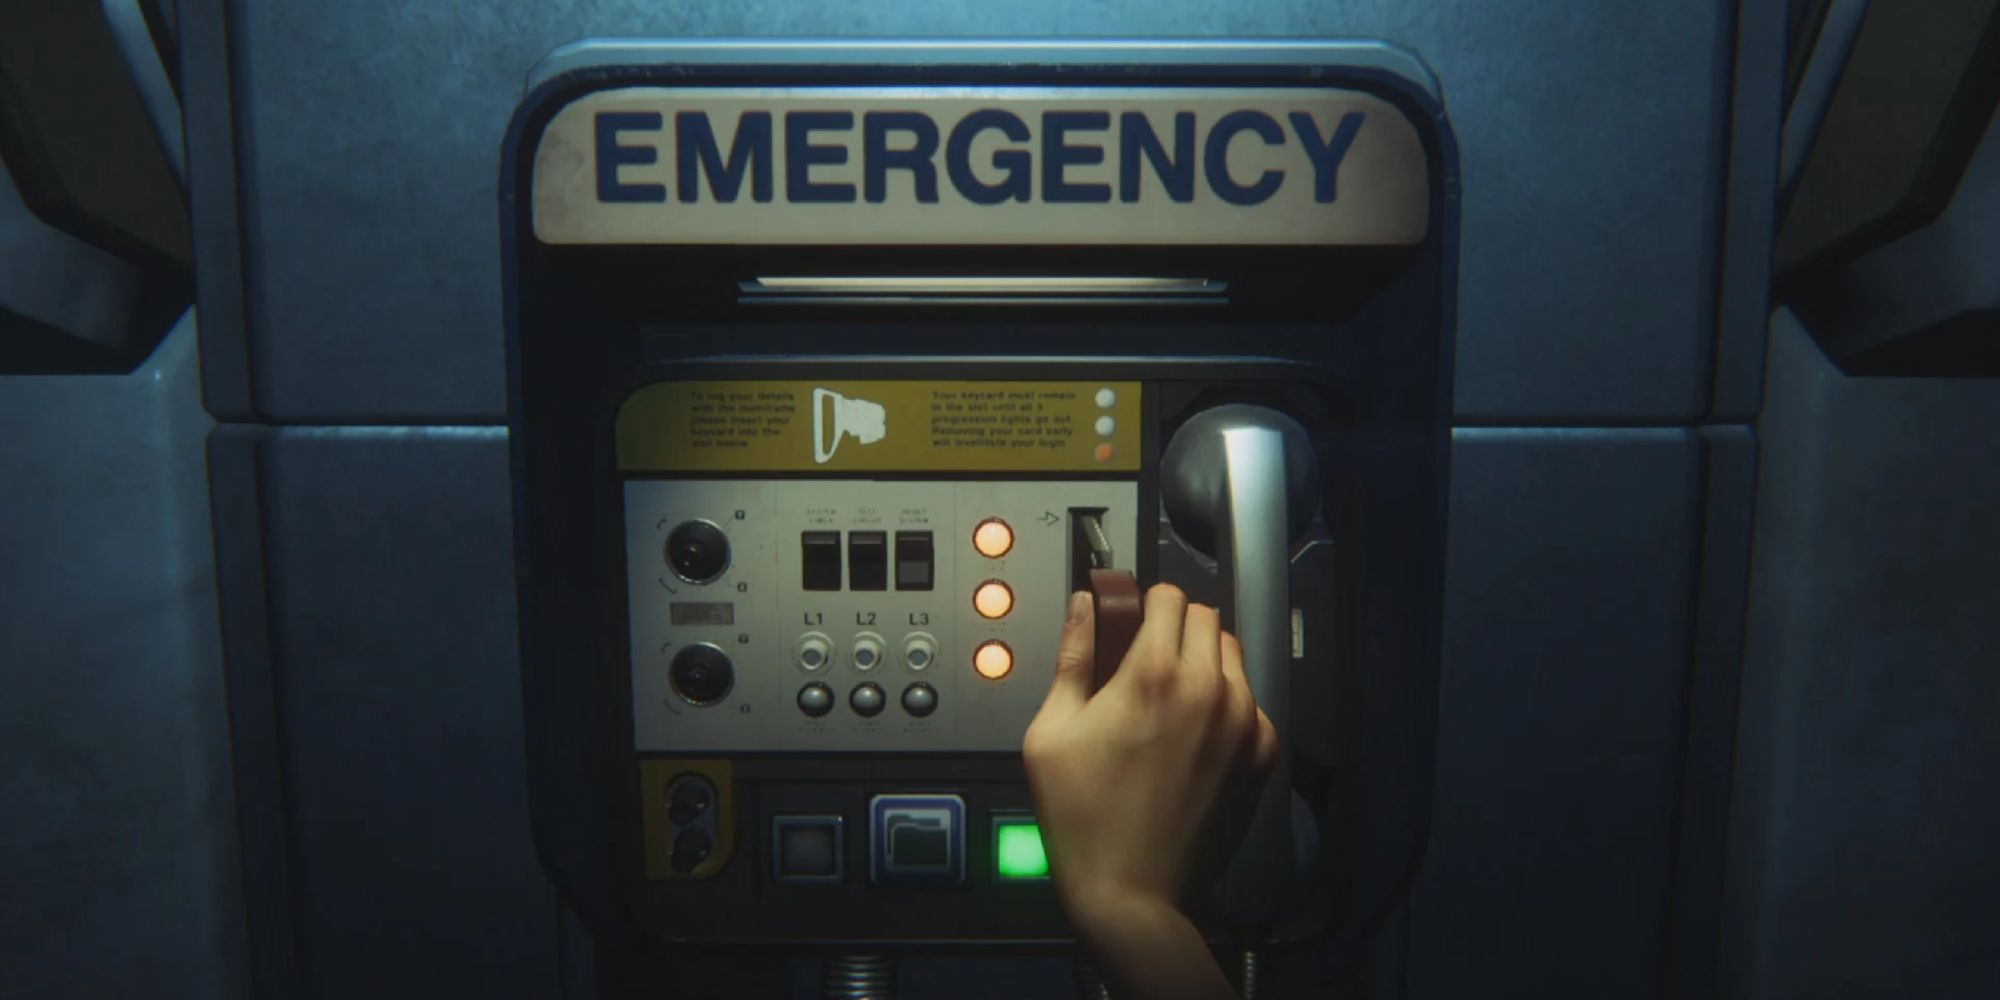 Alien Isolation Emergency Phone would leave players vulnerable to attack